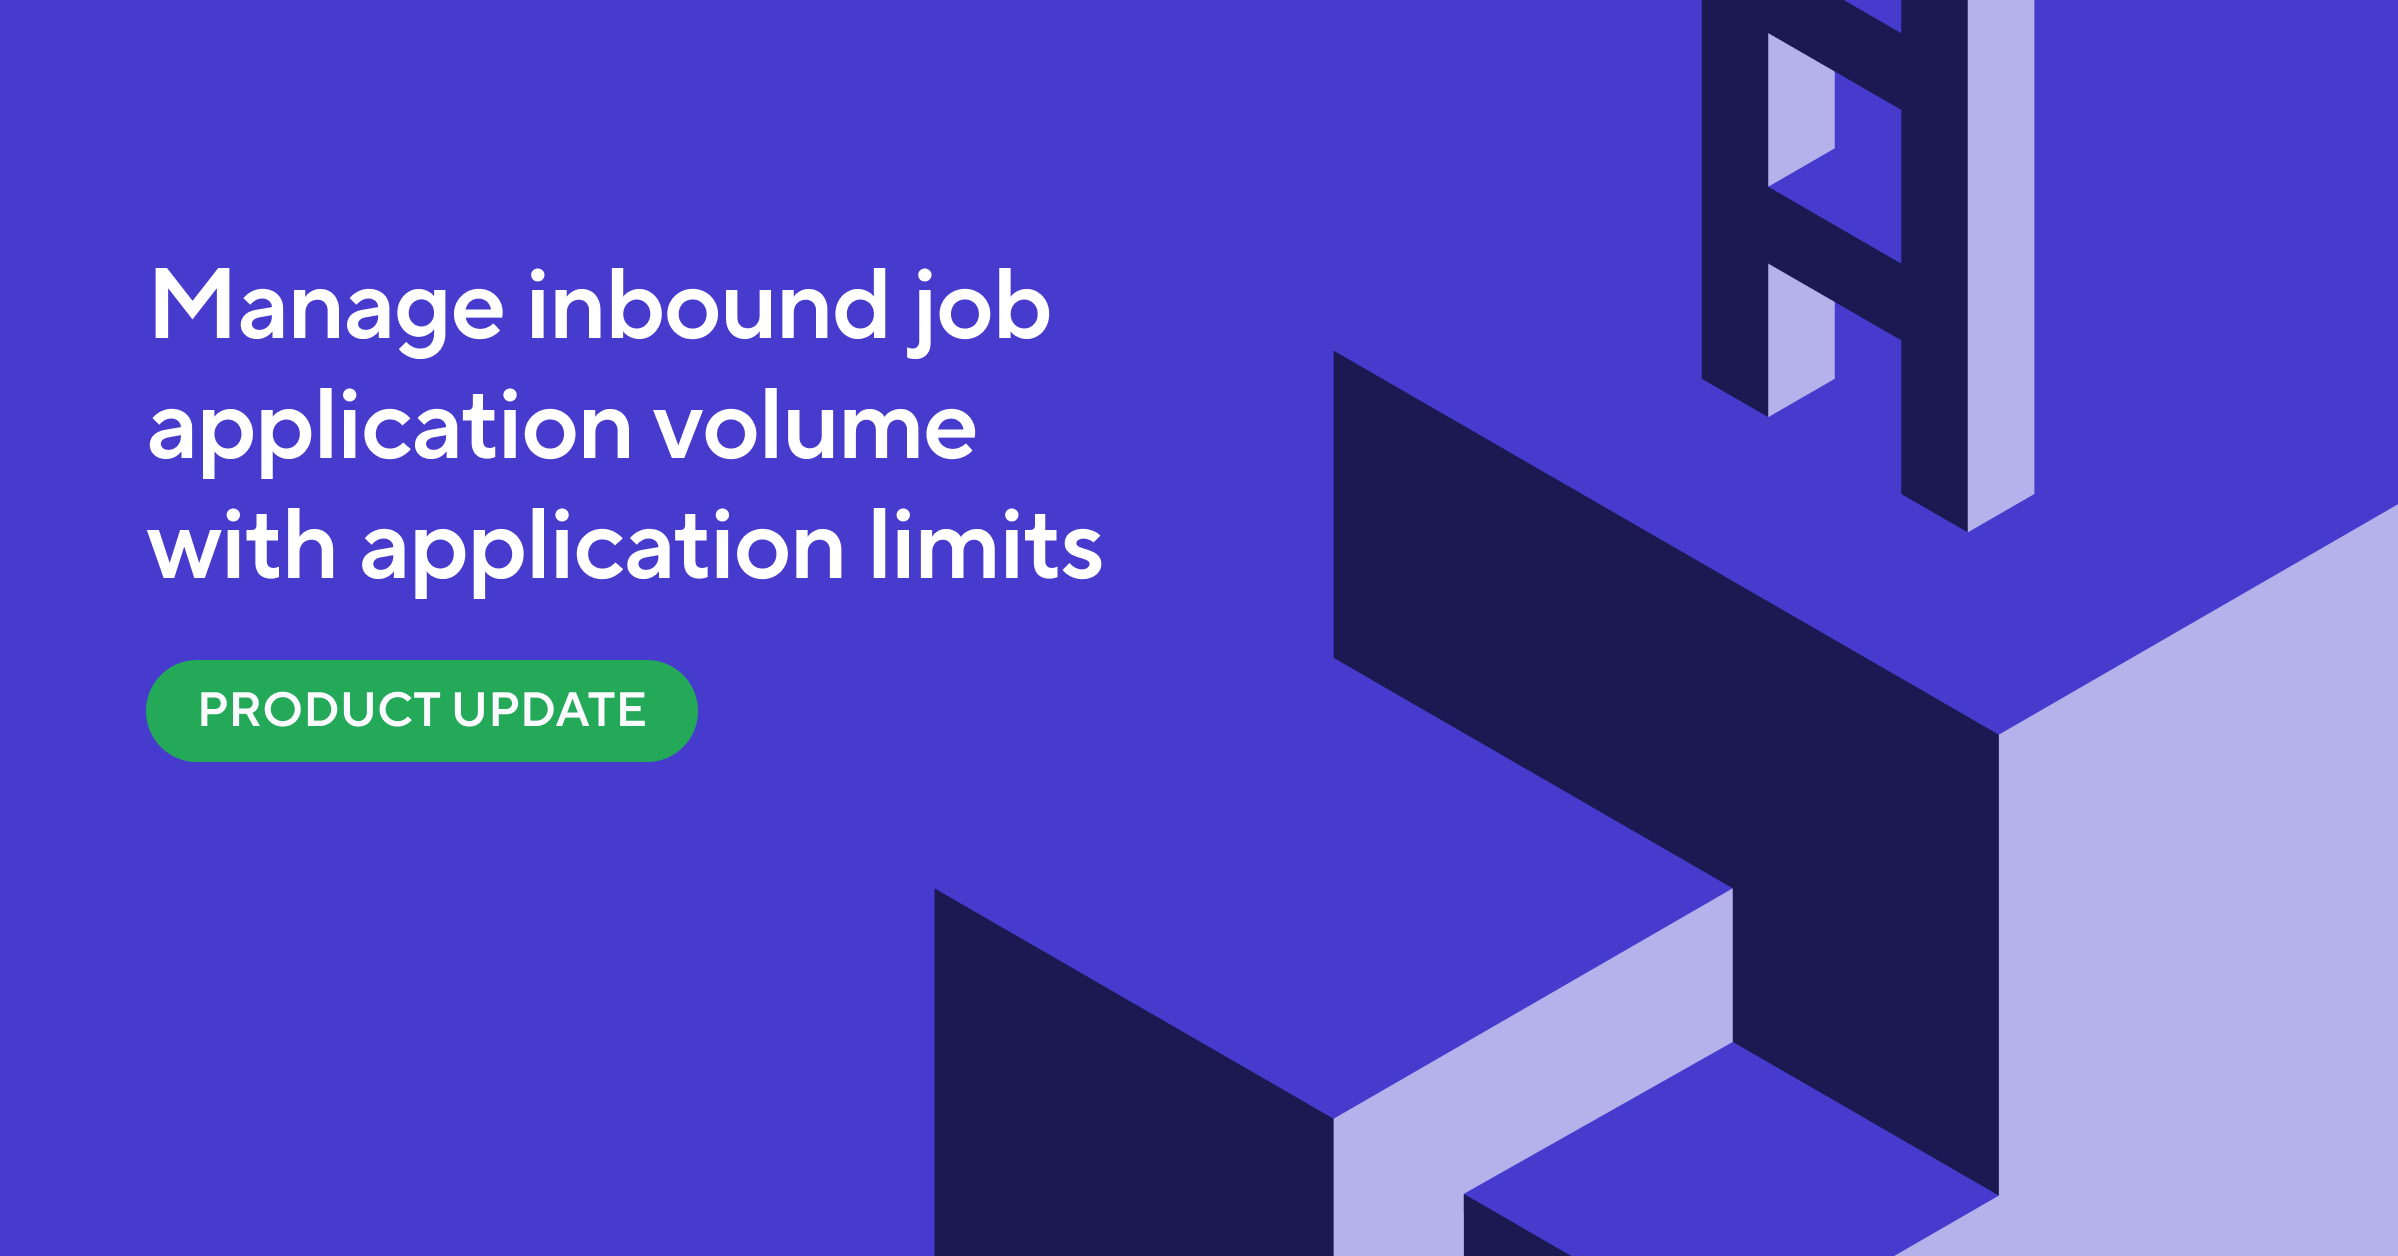 New Feature: Set Application Limits for Inbound Job Applications